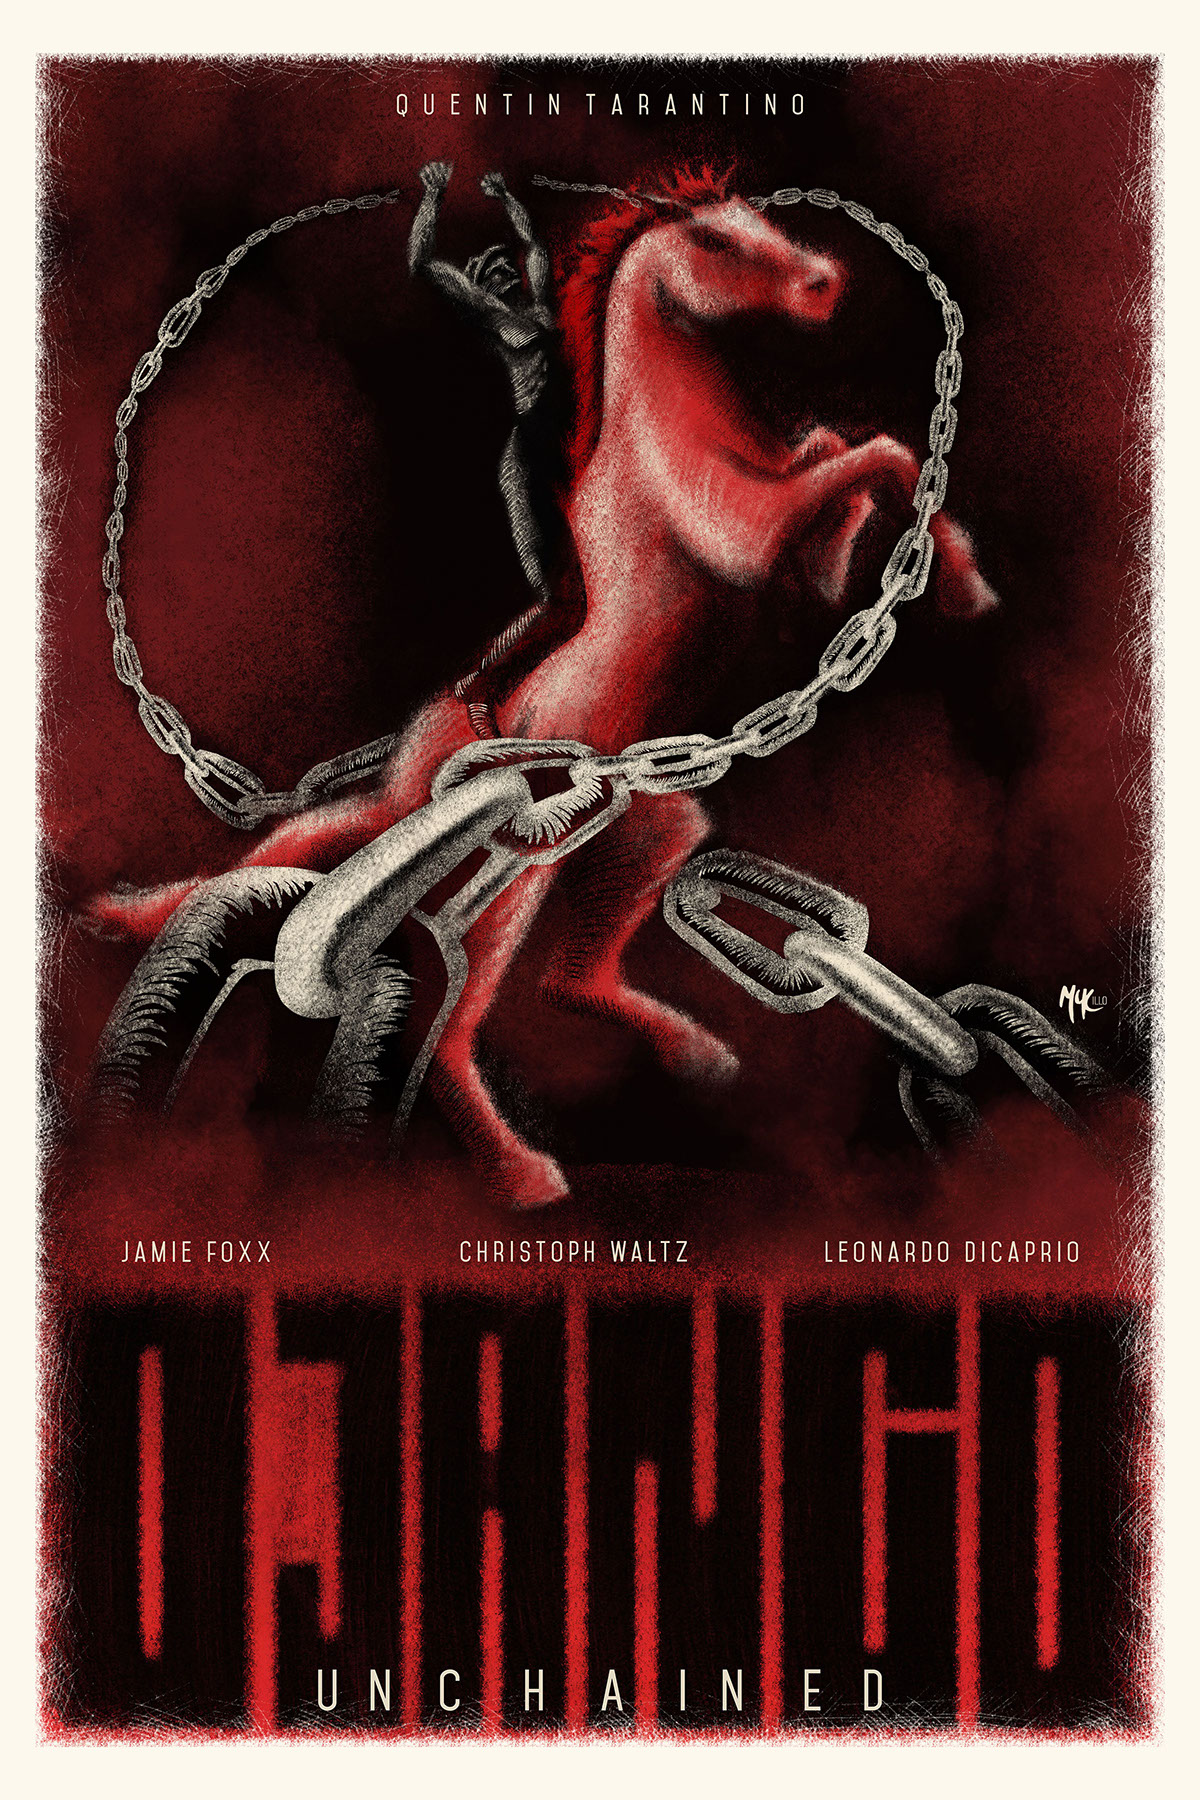 Poster Design movie poster Django Unchained Quentin Tarantino HAND LETTERING